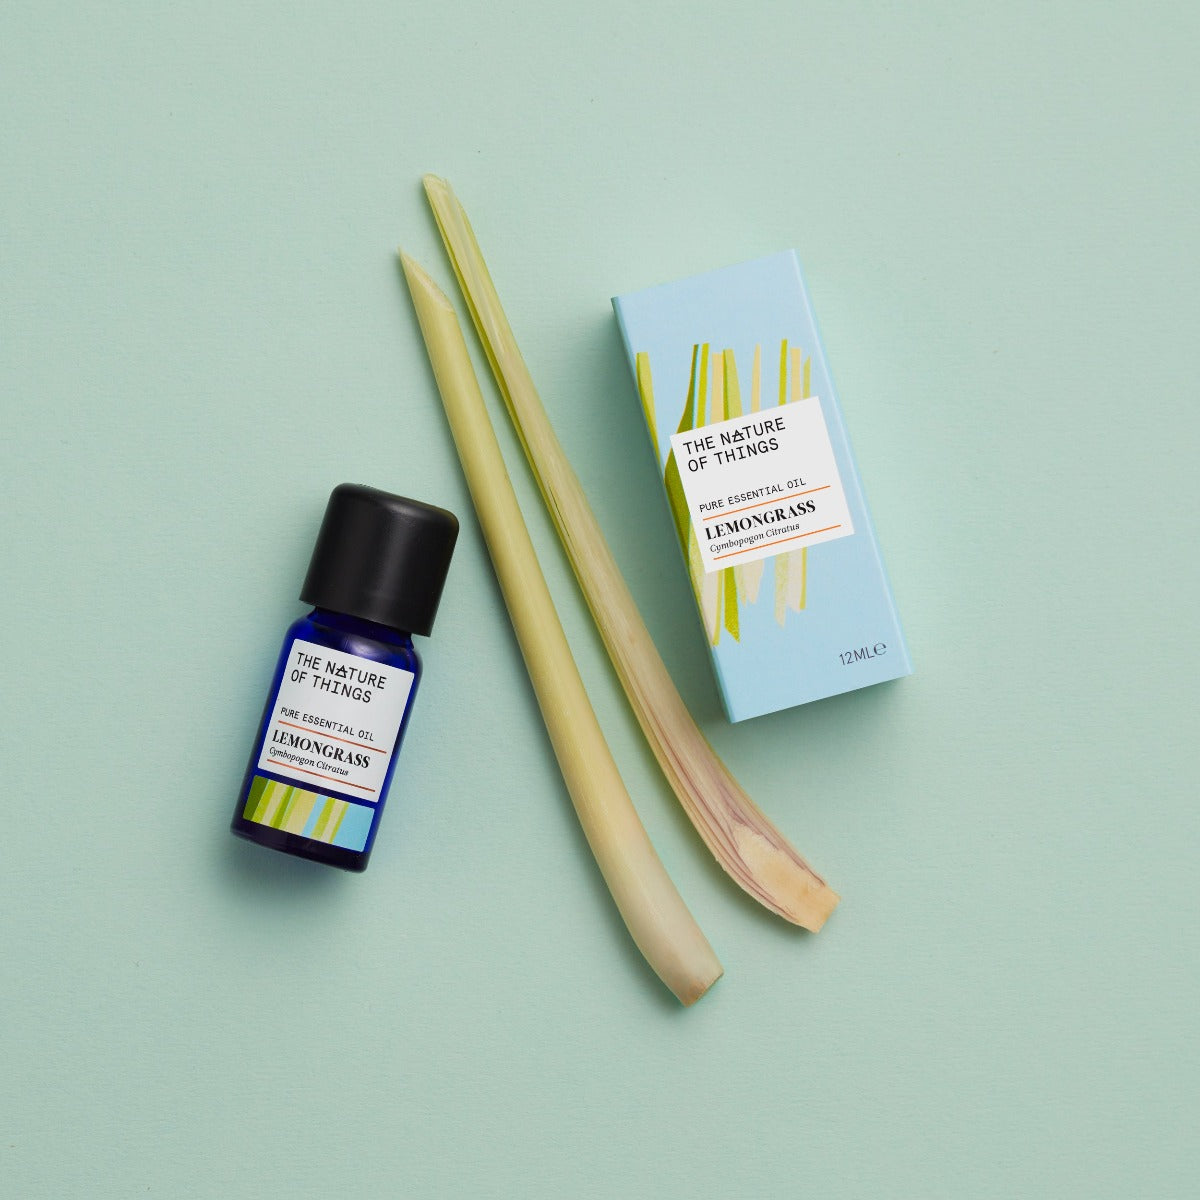 Lemongrass Essential Oil from The Nature of Things